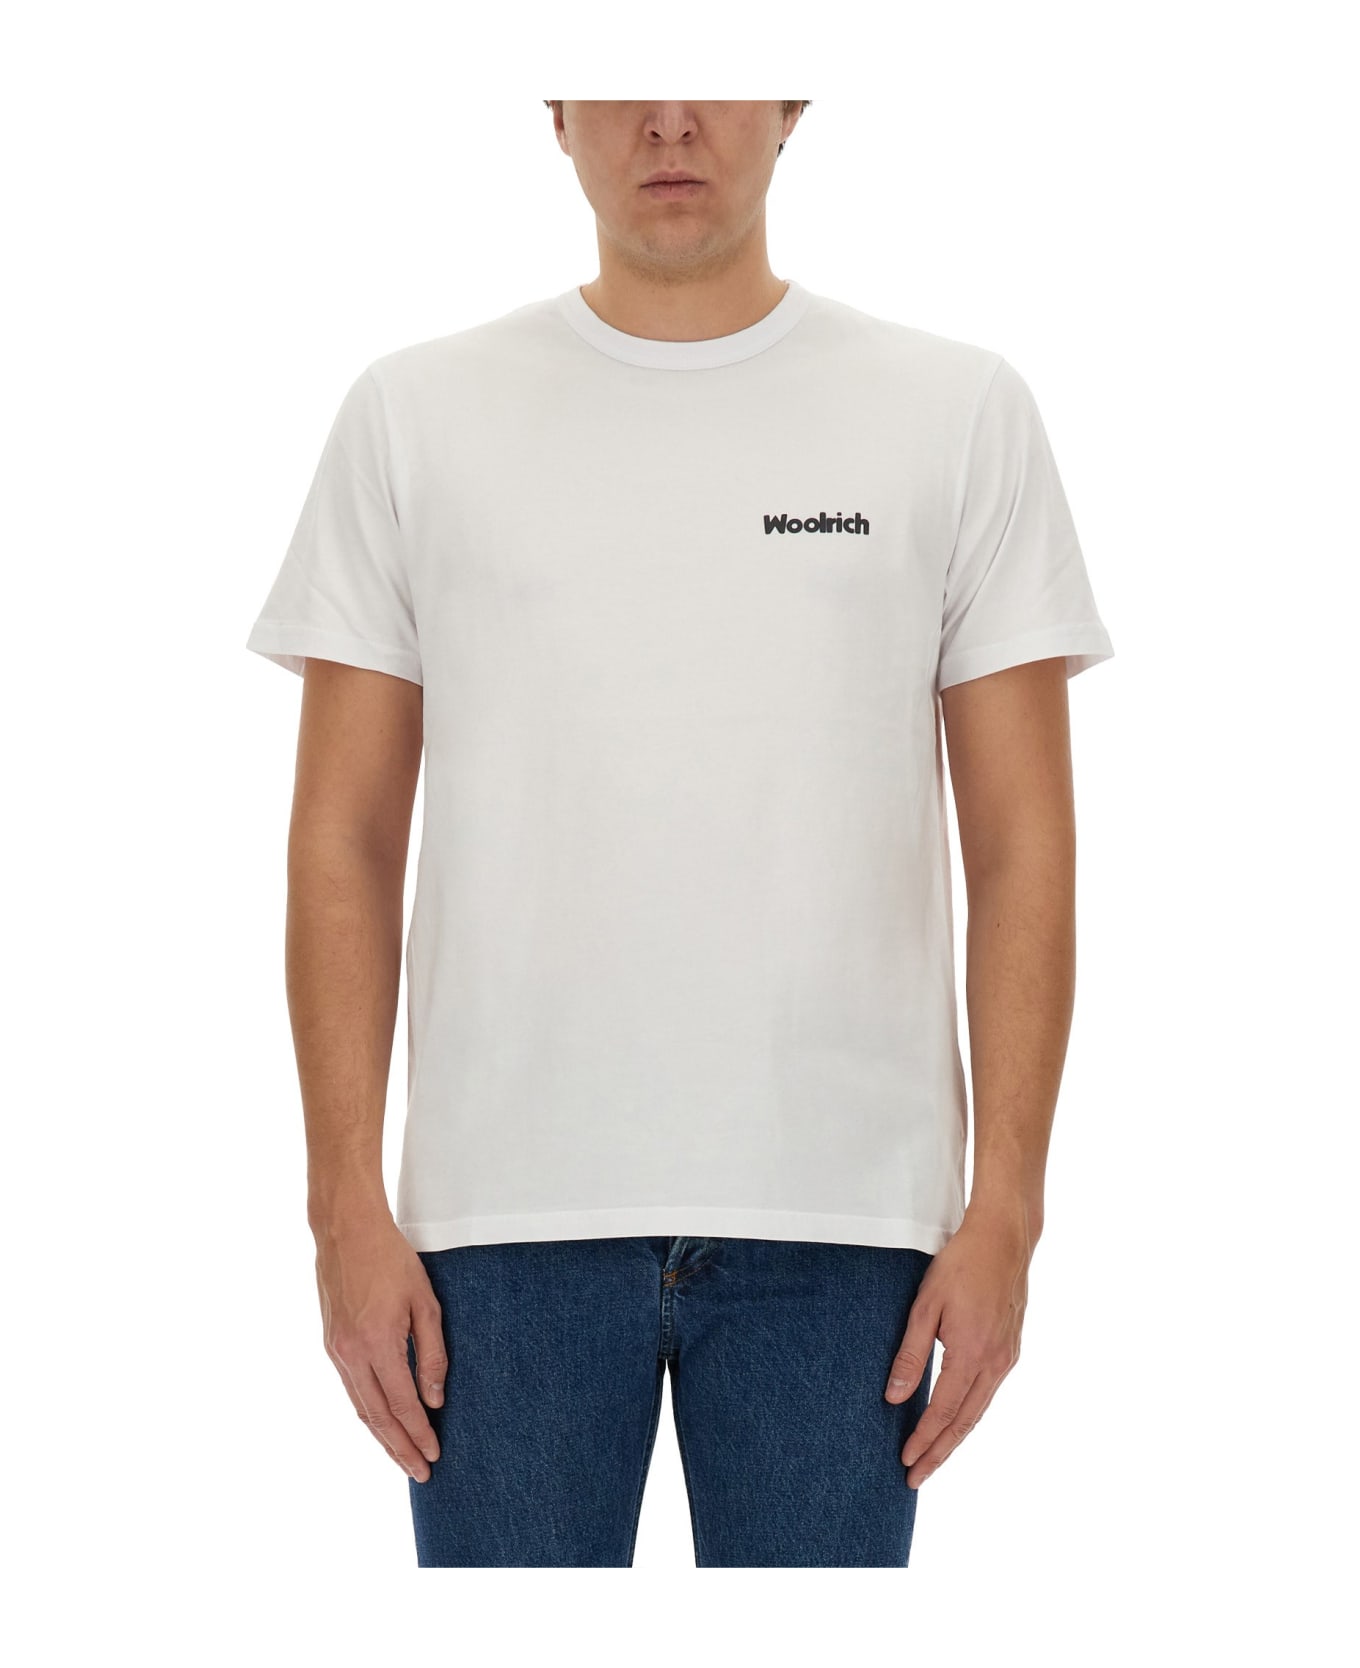 Woolrich T-shirt With Logo - White シャツ